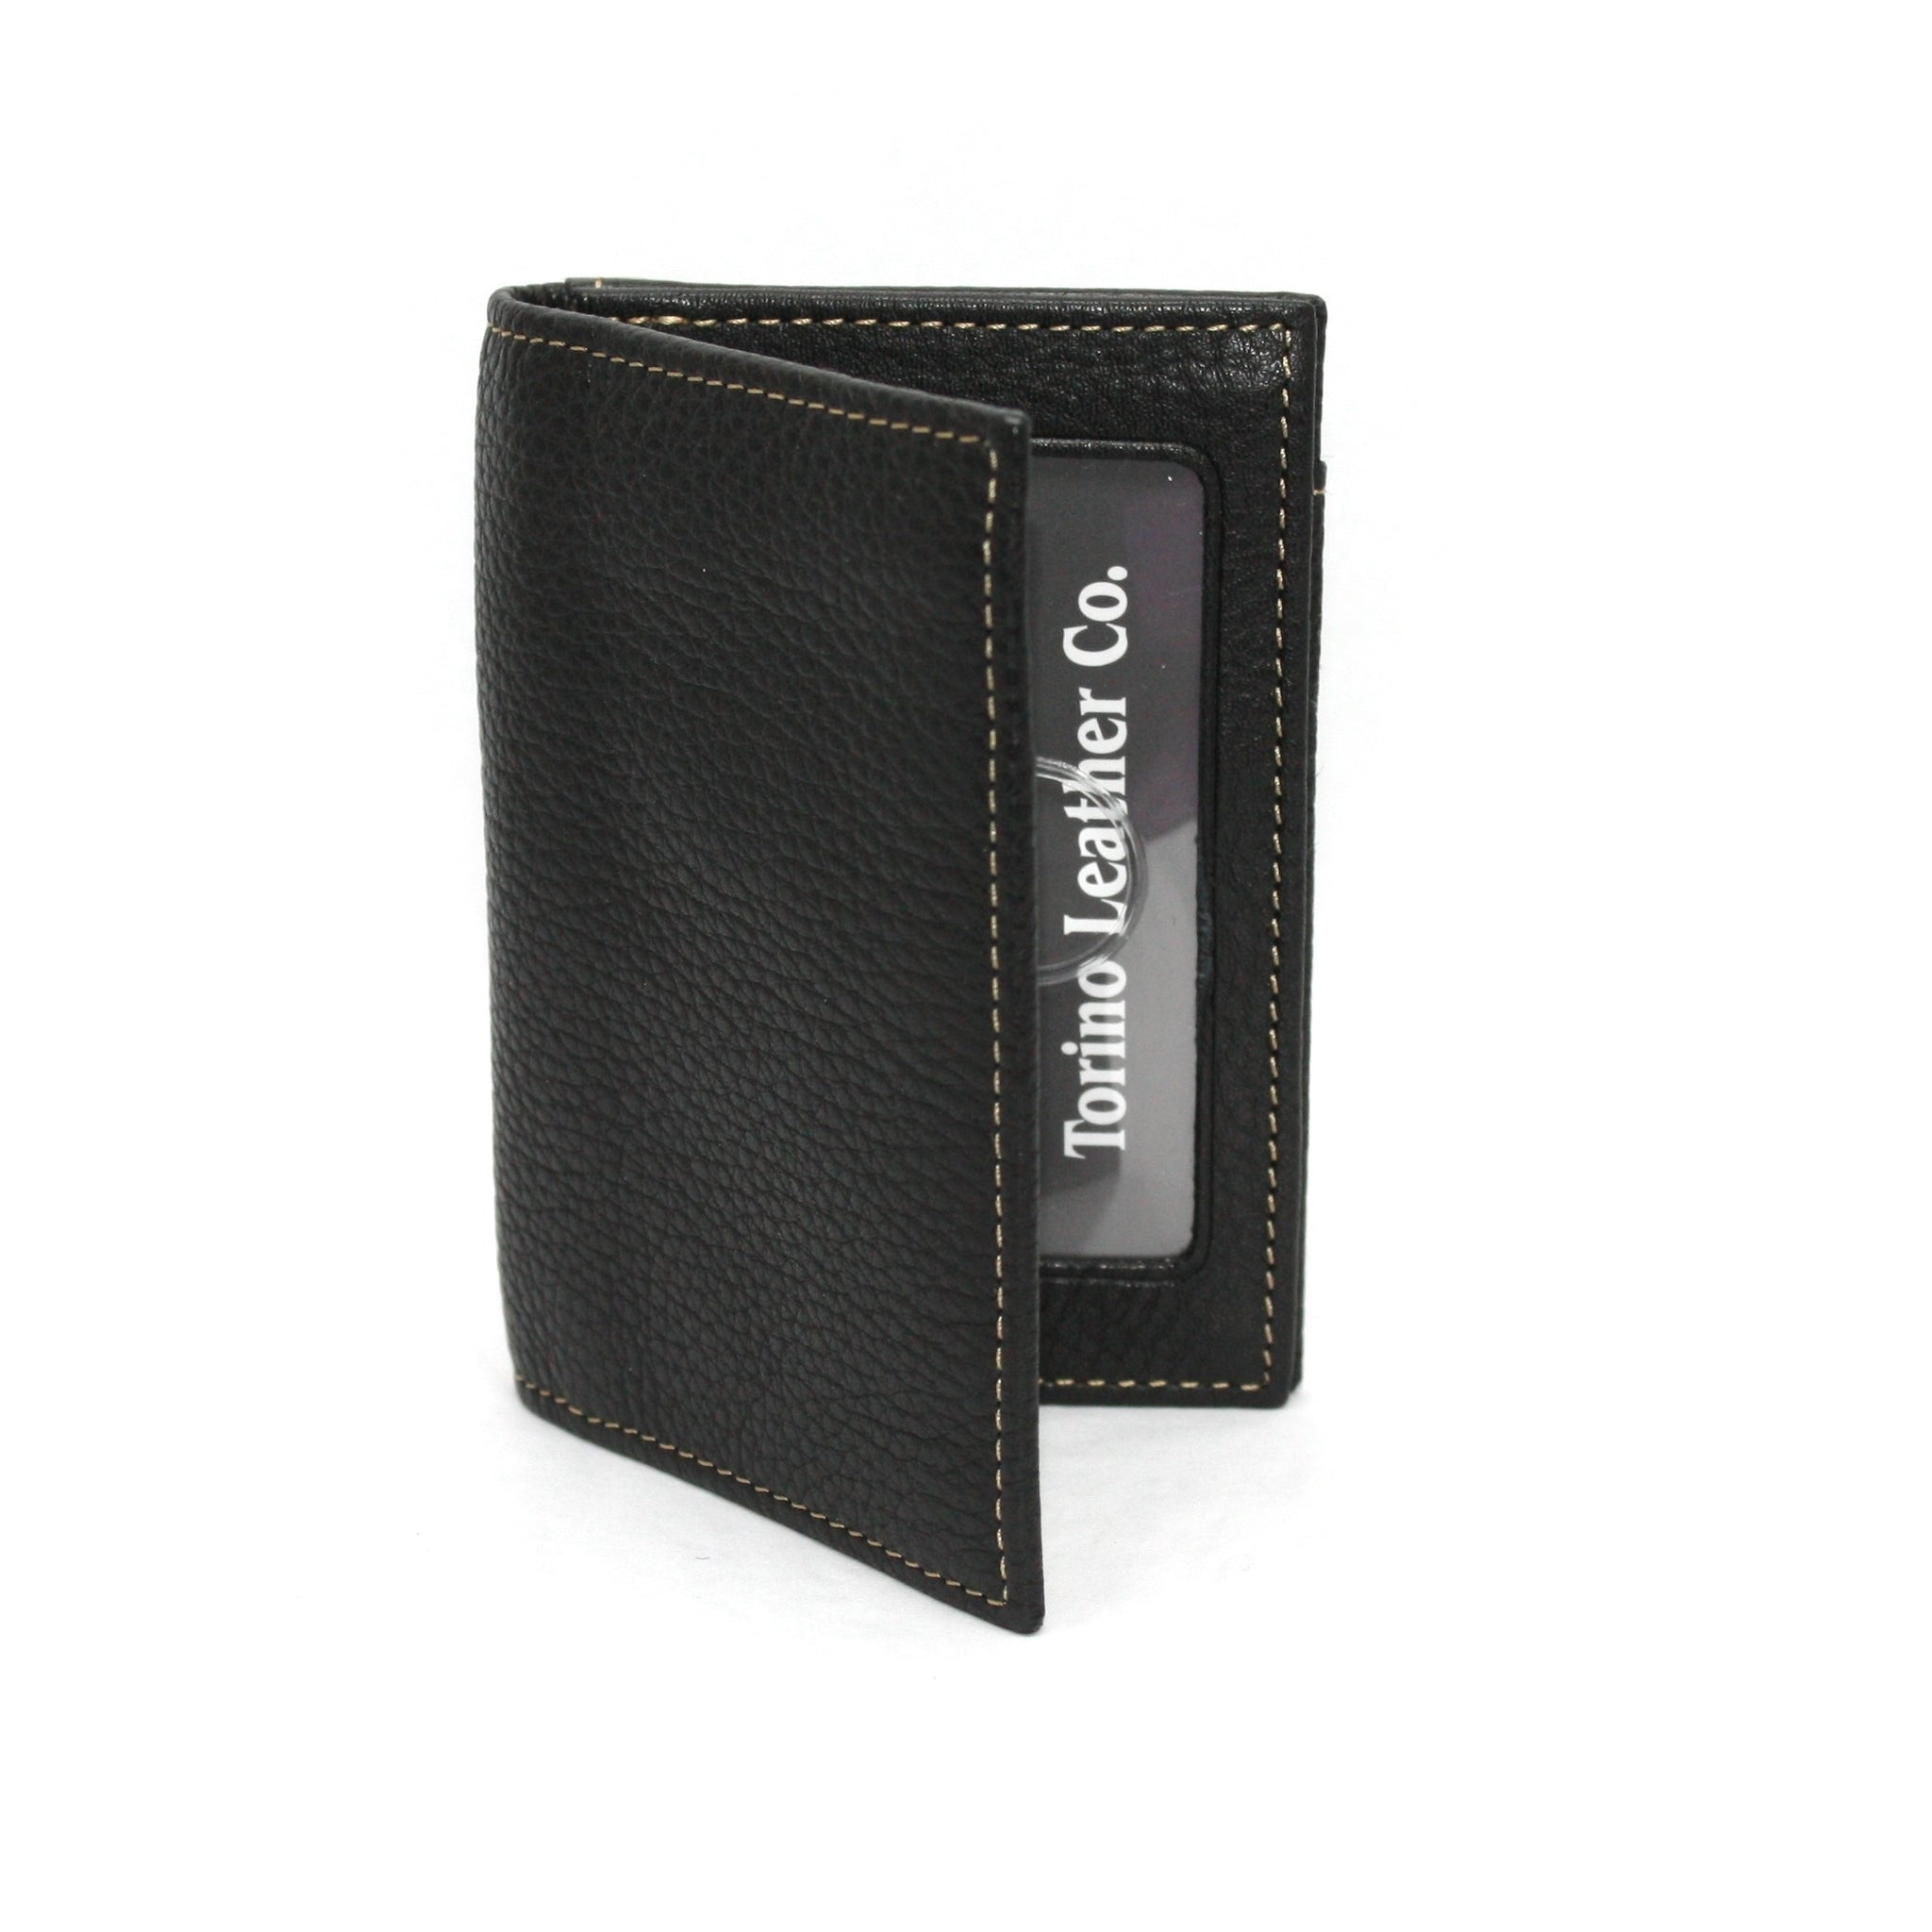 Tumbled Glove Leather Gusseted Card Case - Black